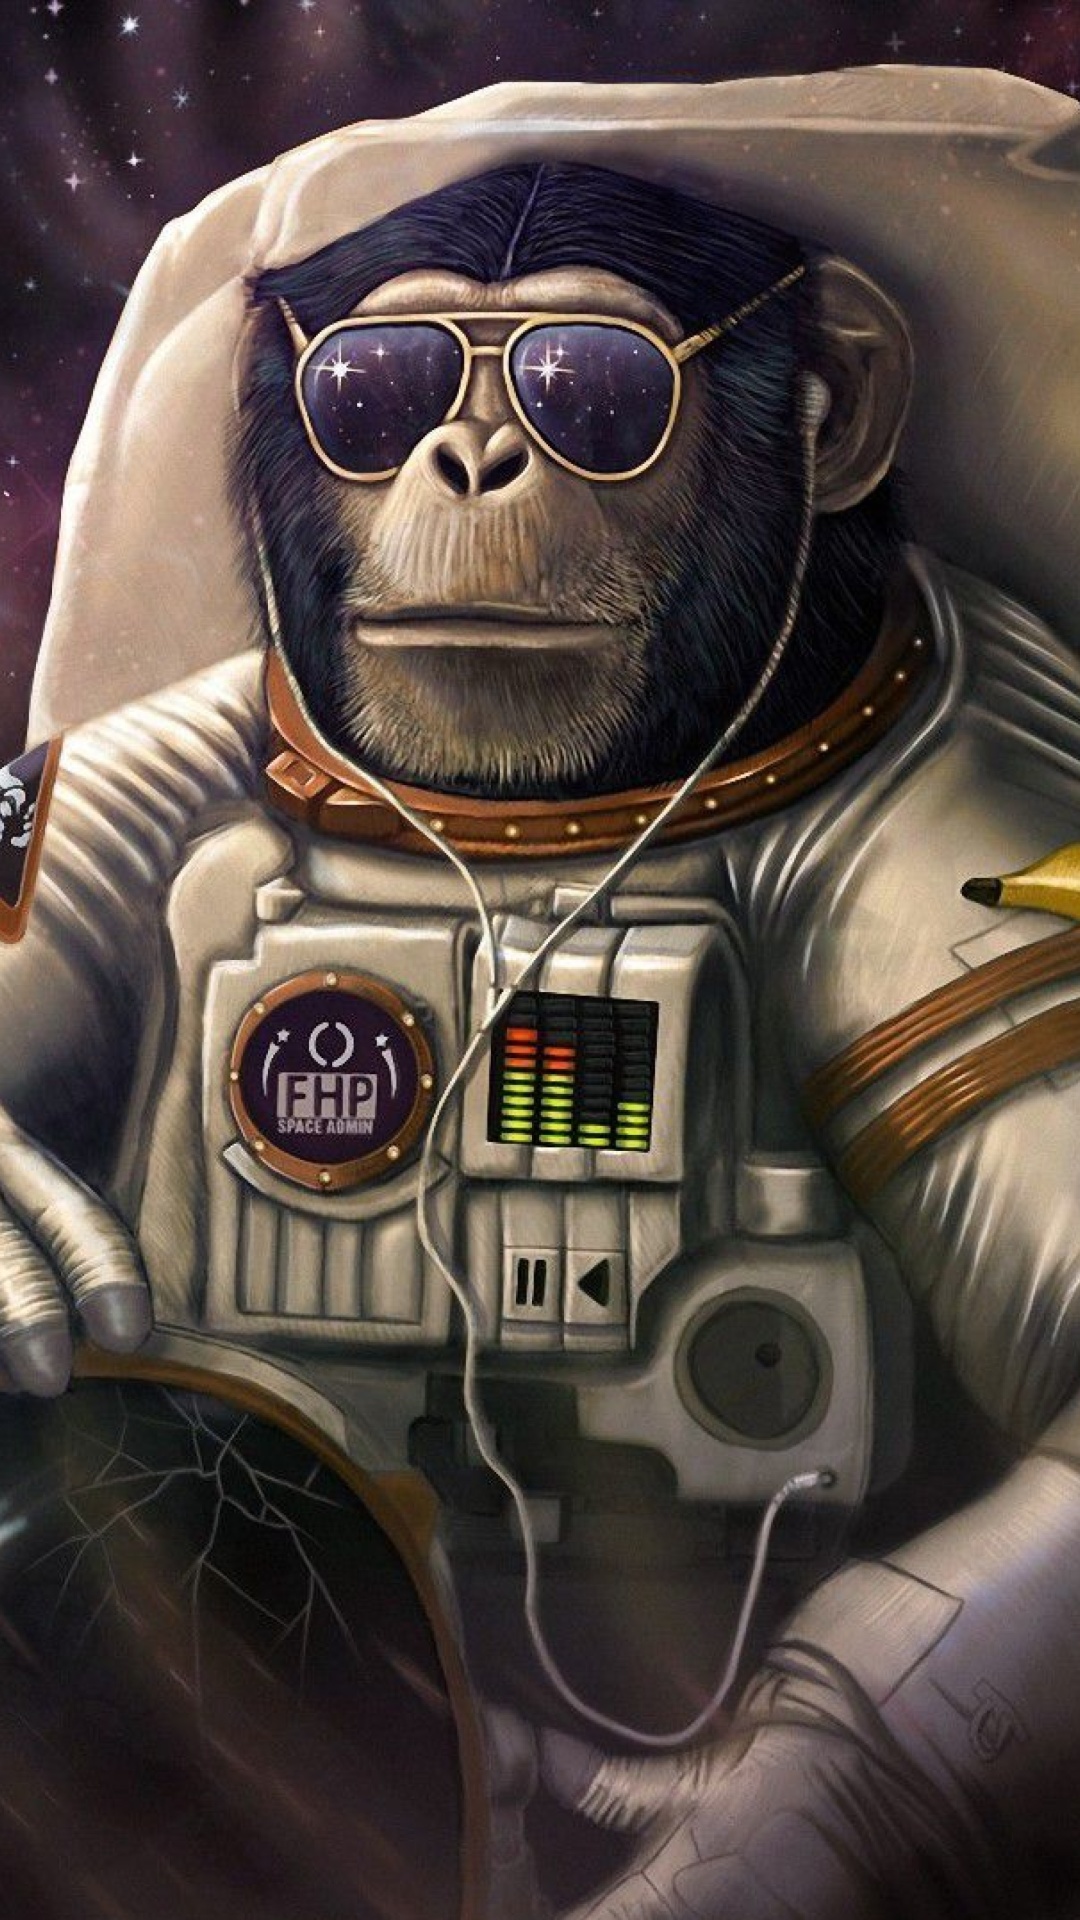 Monkeys and apes in space screenshot #1 1080x1920